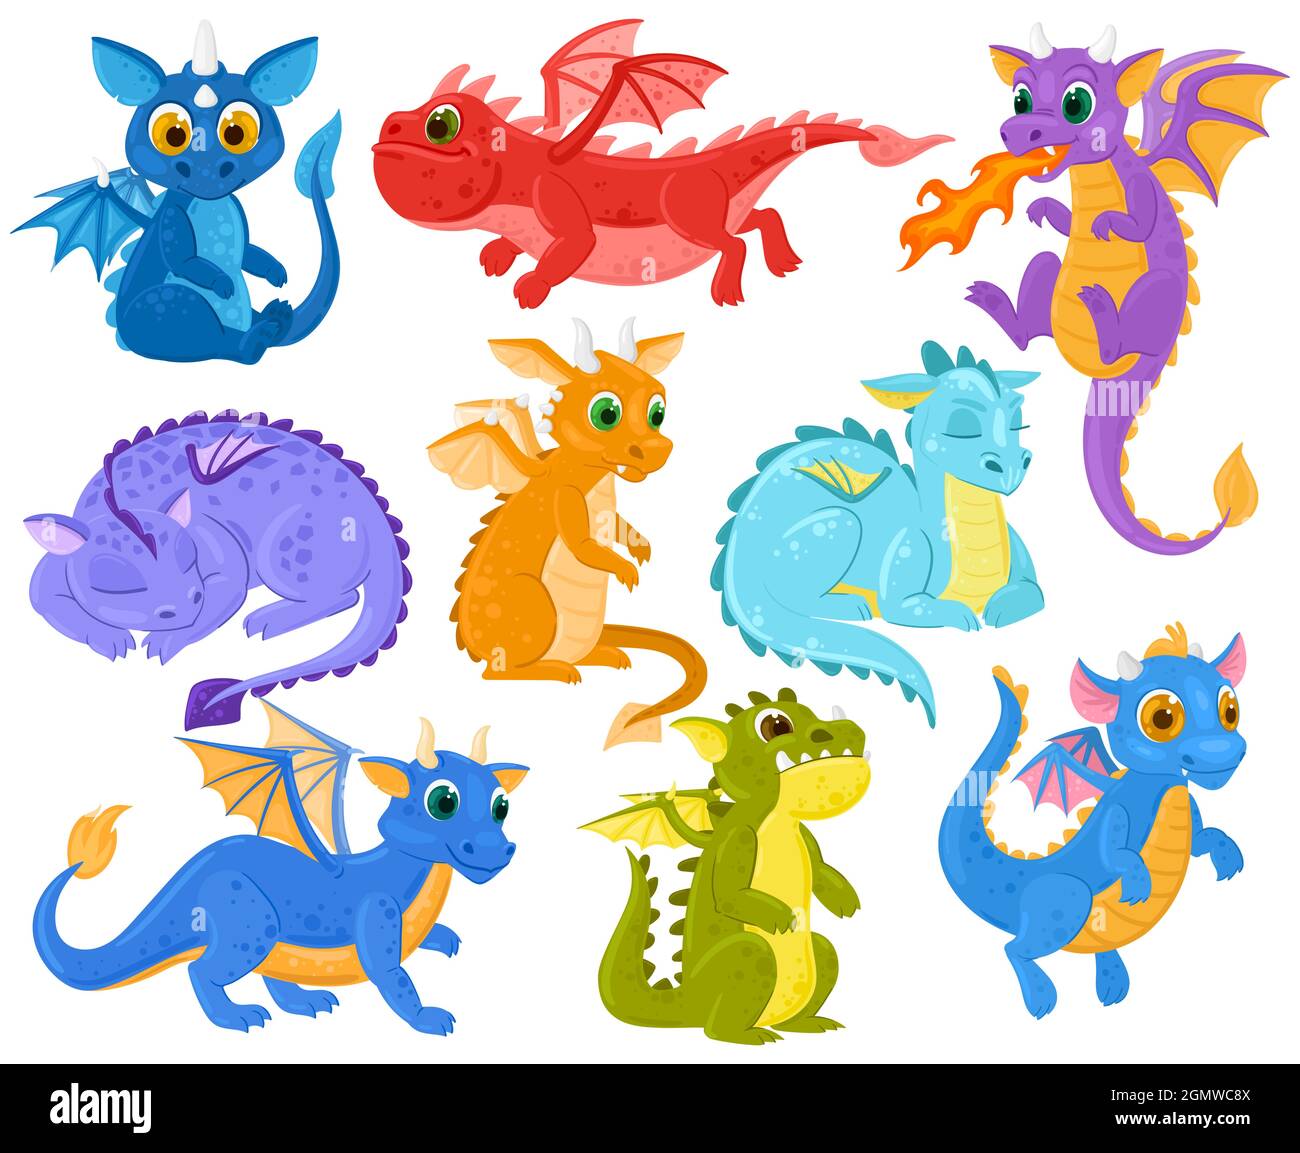 Cartoon dragon kids fantasy cute creature mascots. Funny dragon babies, medieval legends and fairytales dino characters vector illustration set Stock Vector